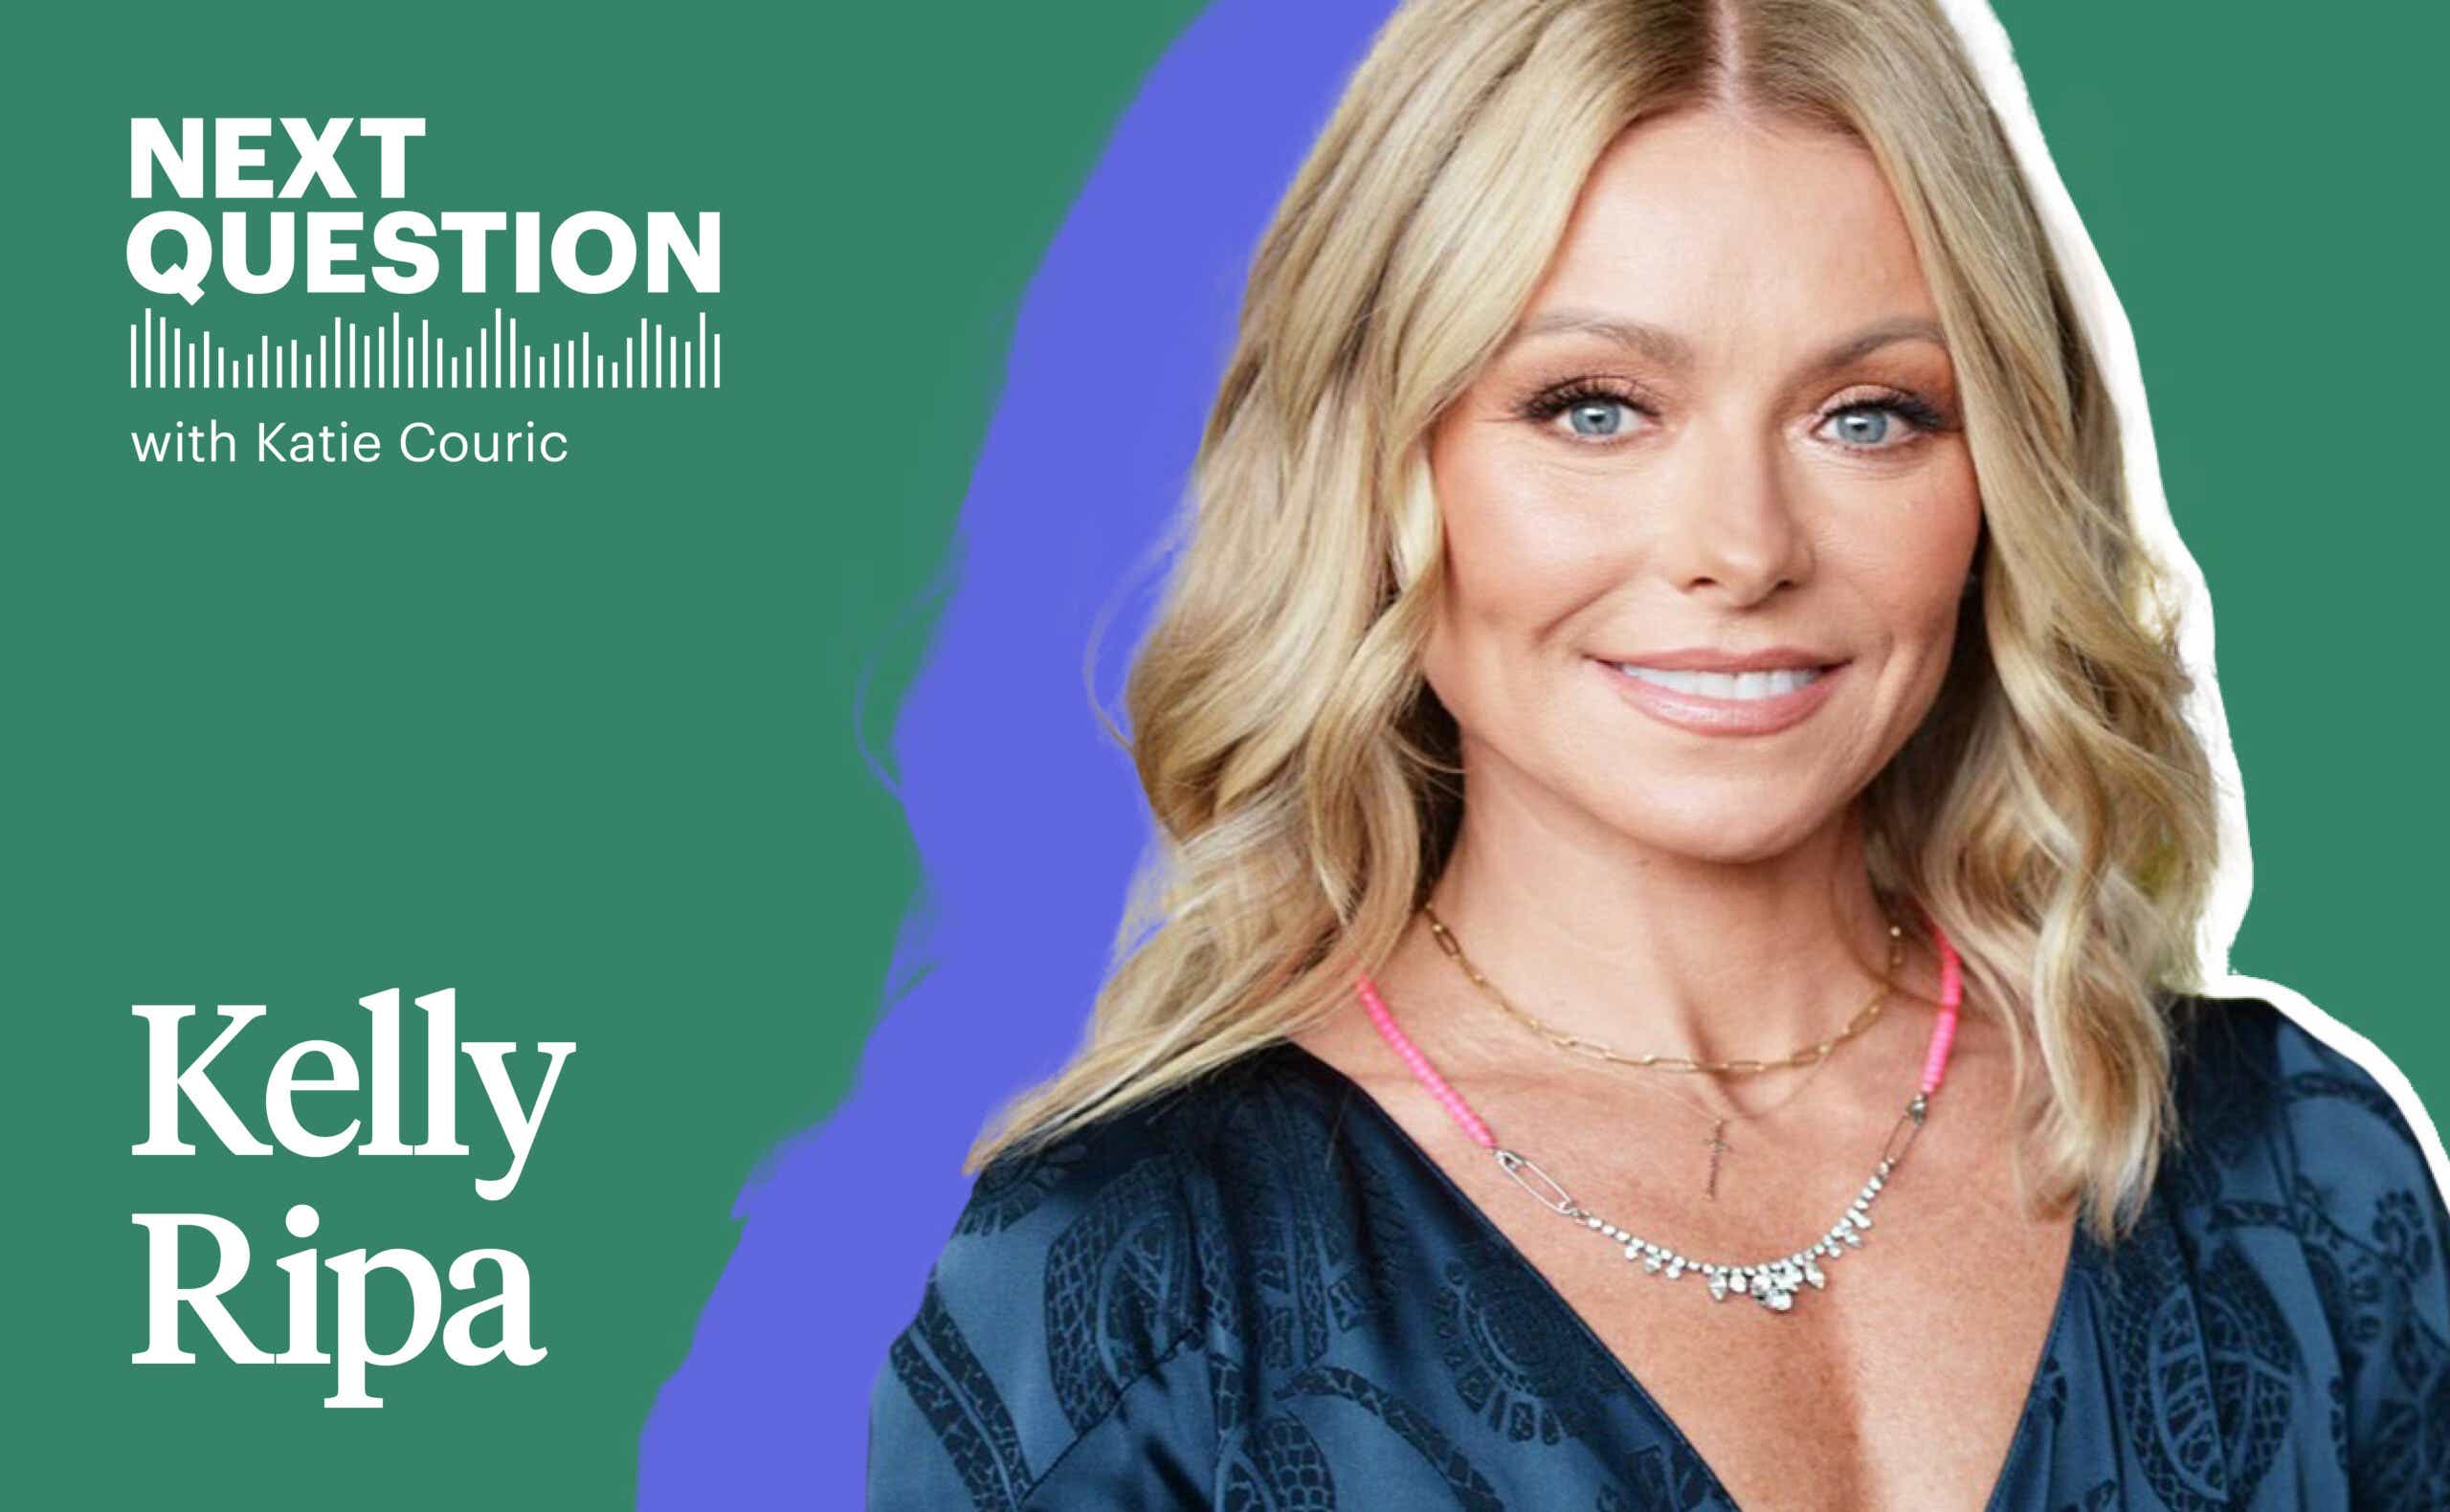 A close up image of Kelly Ripa smiling lightly is collaged atop a green and purple background.